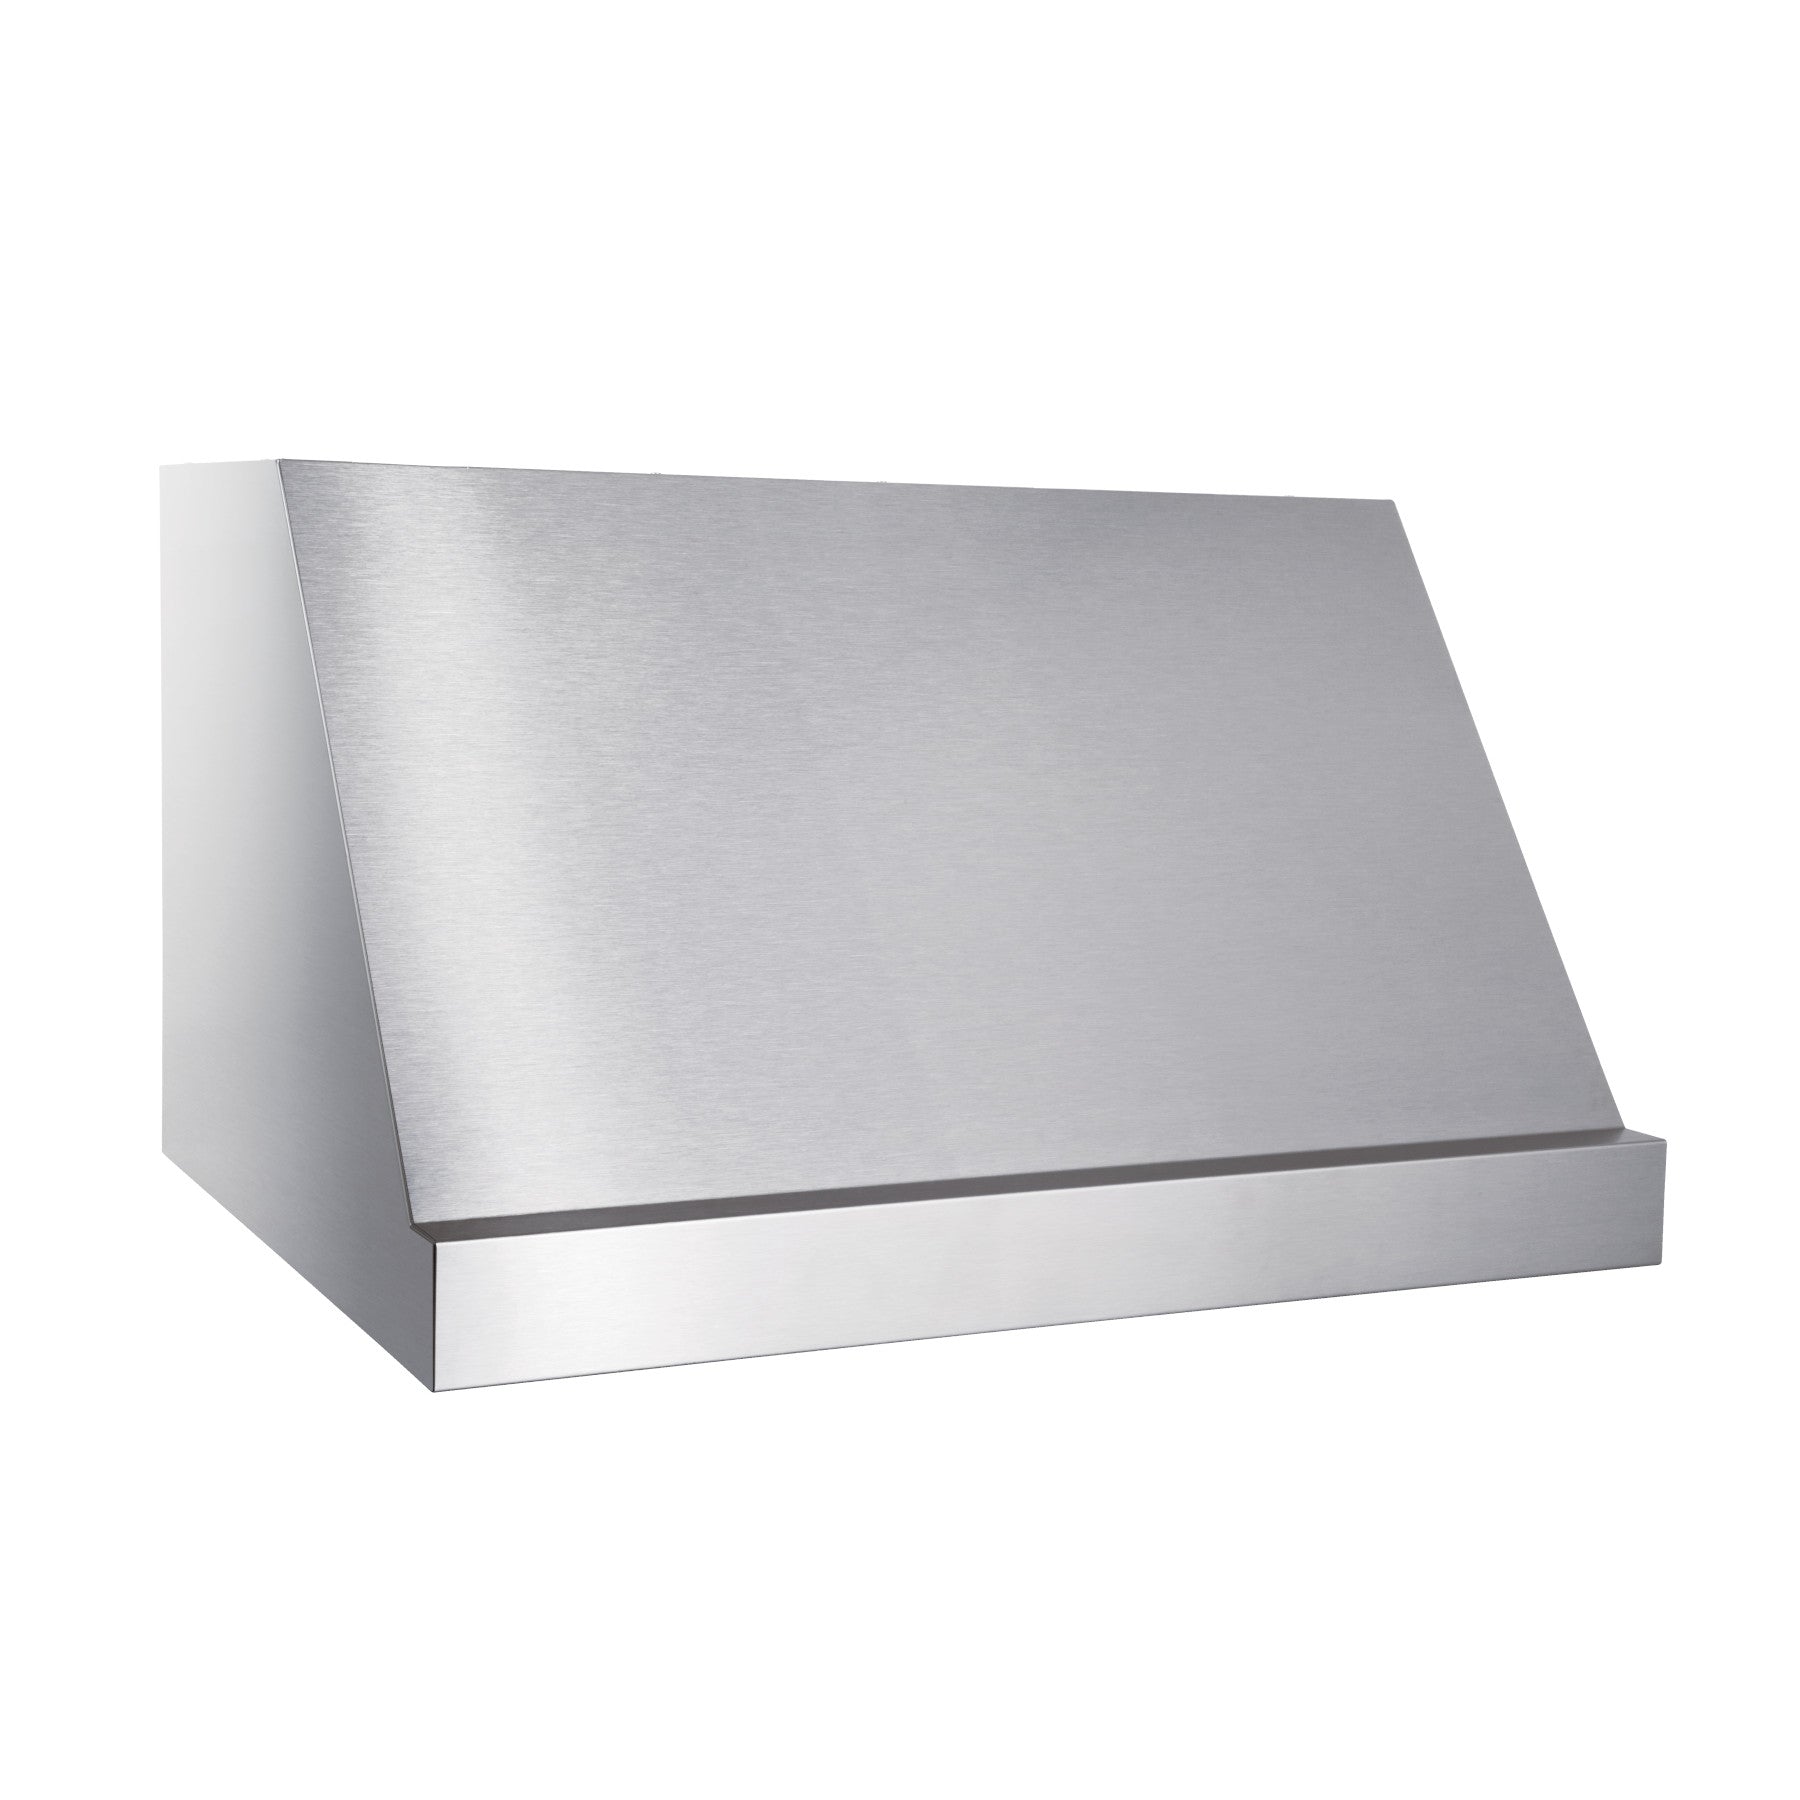 Best - 36 Inch Wall Mount and Chimney Range Vent in Stainless - WP28M36SB